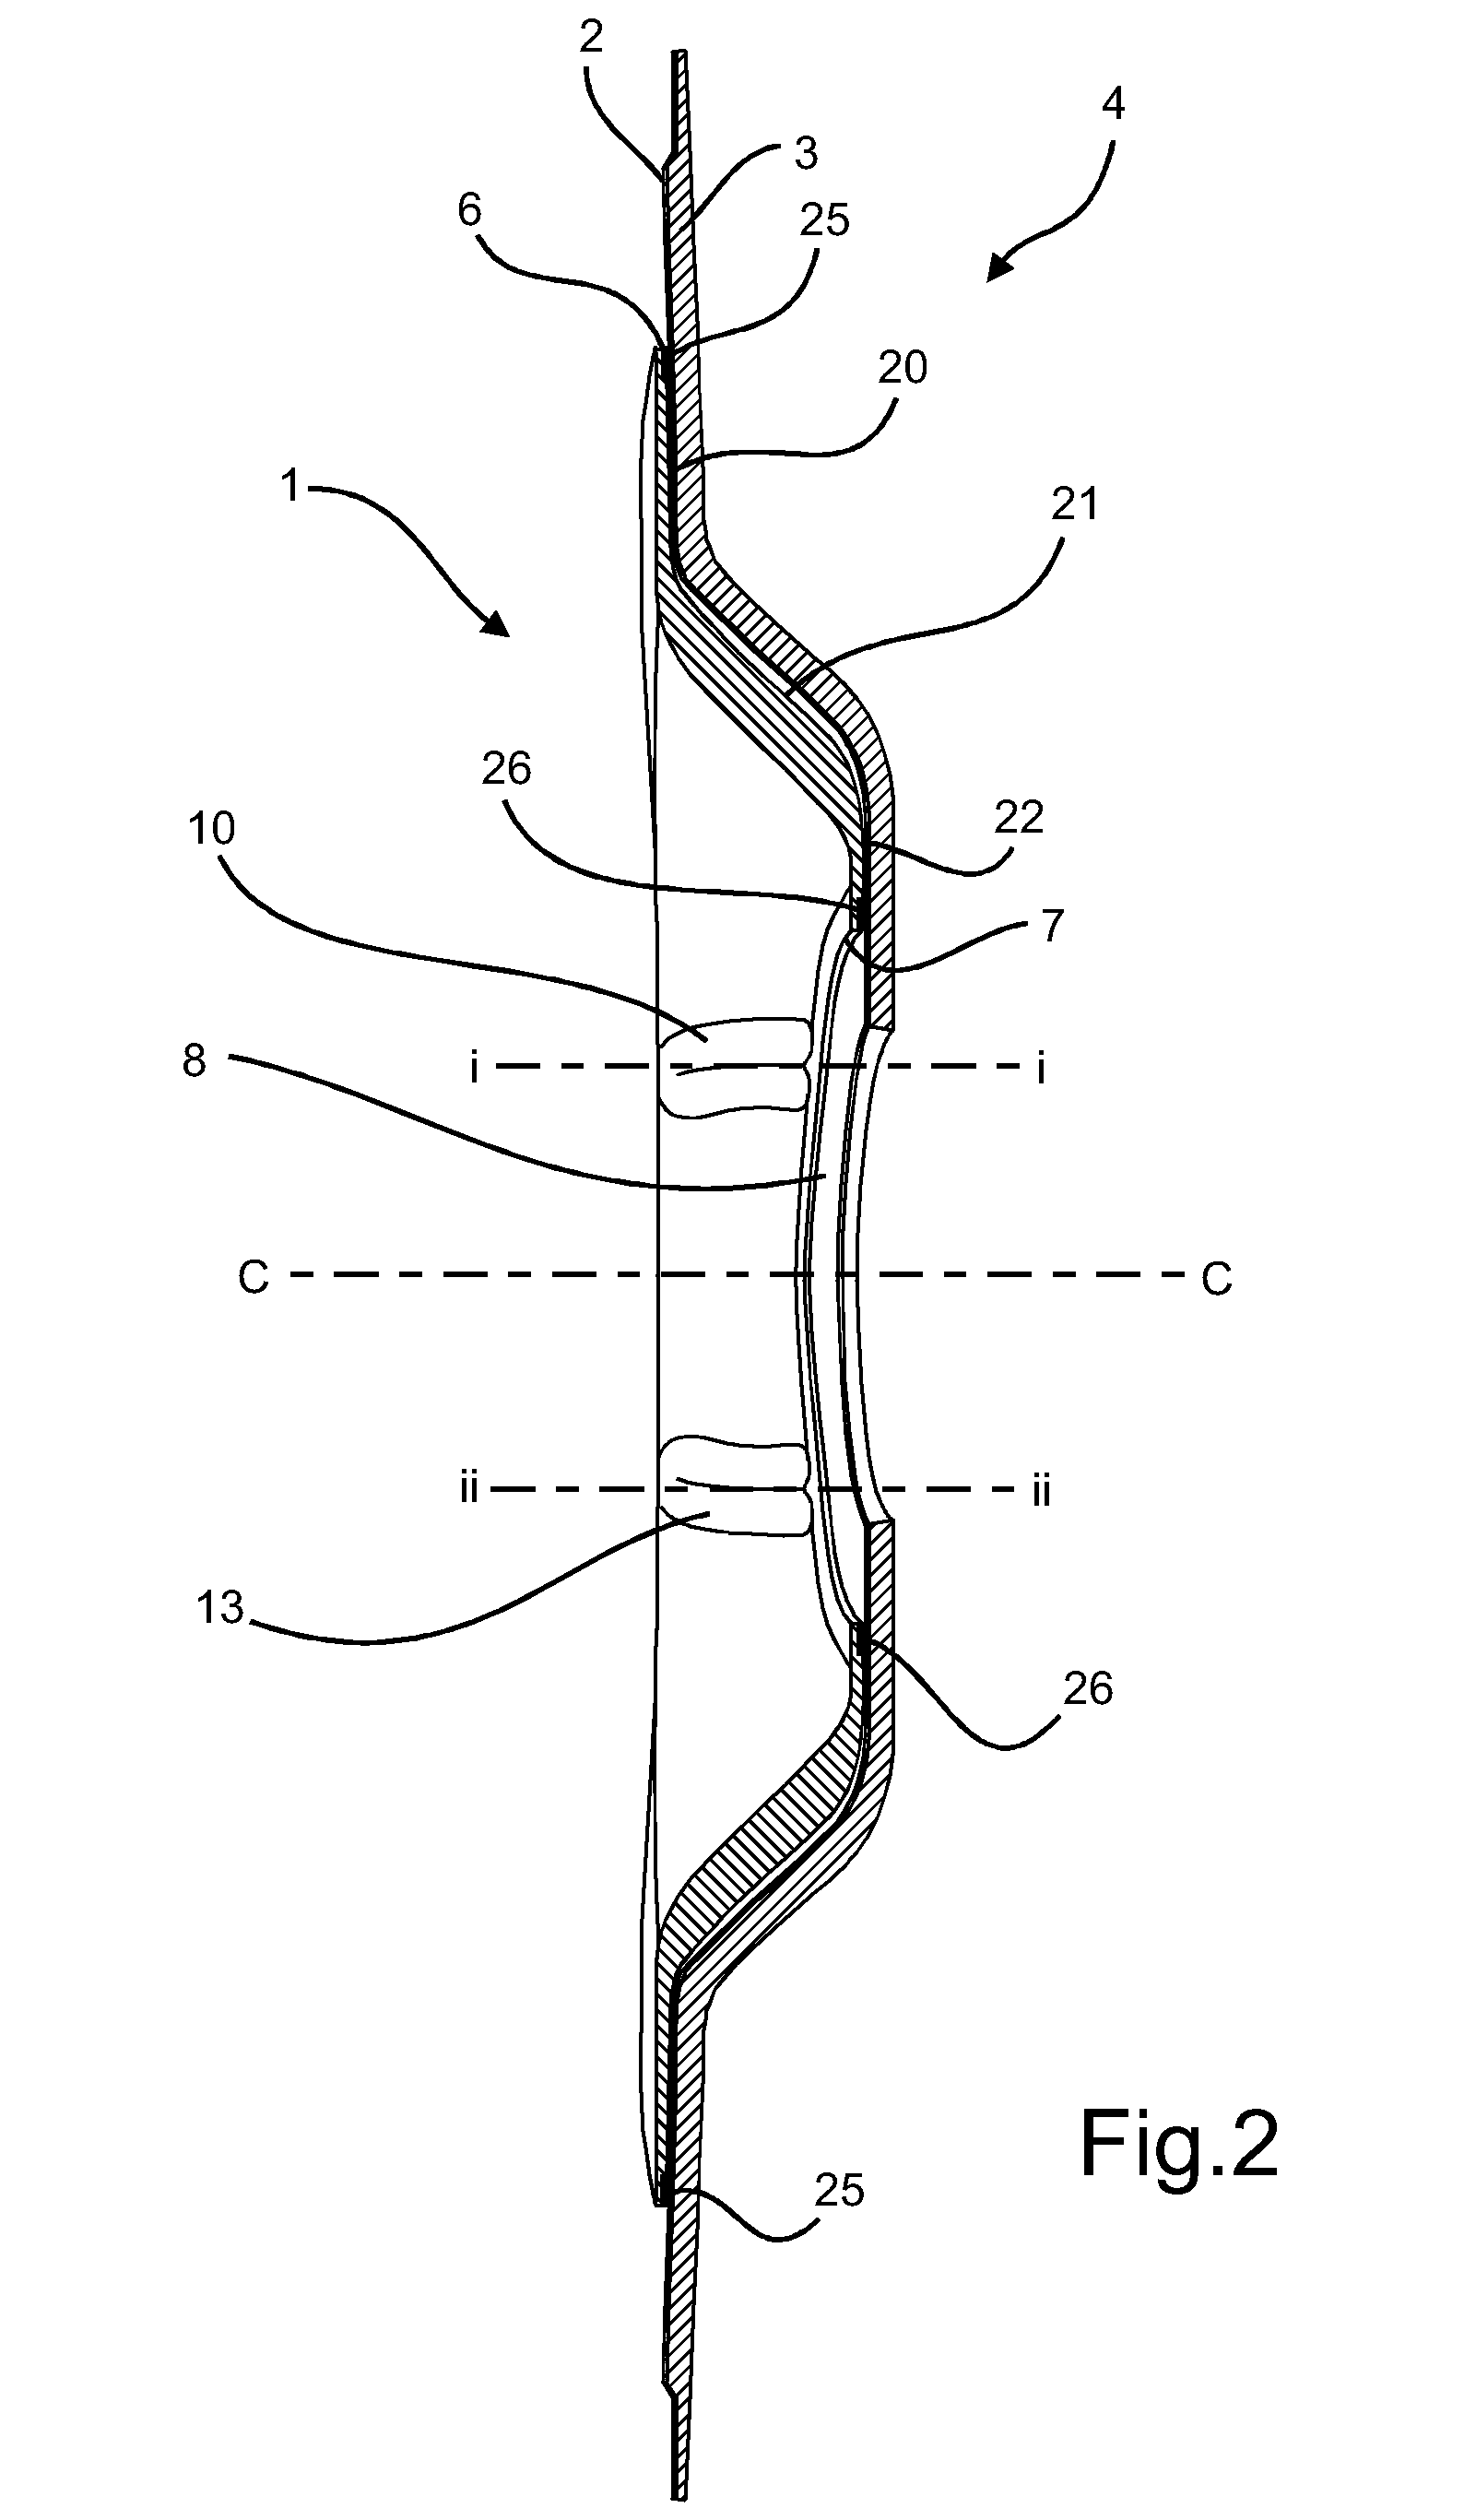 To control bending in a skin plate for use in an ostomy appliance